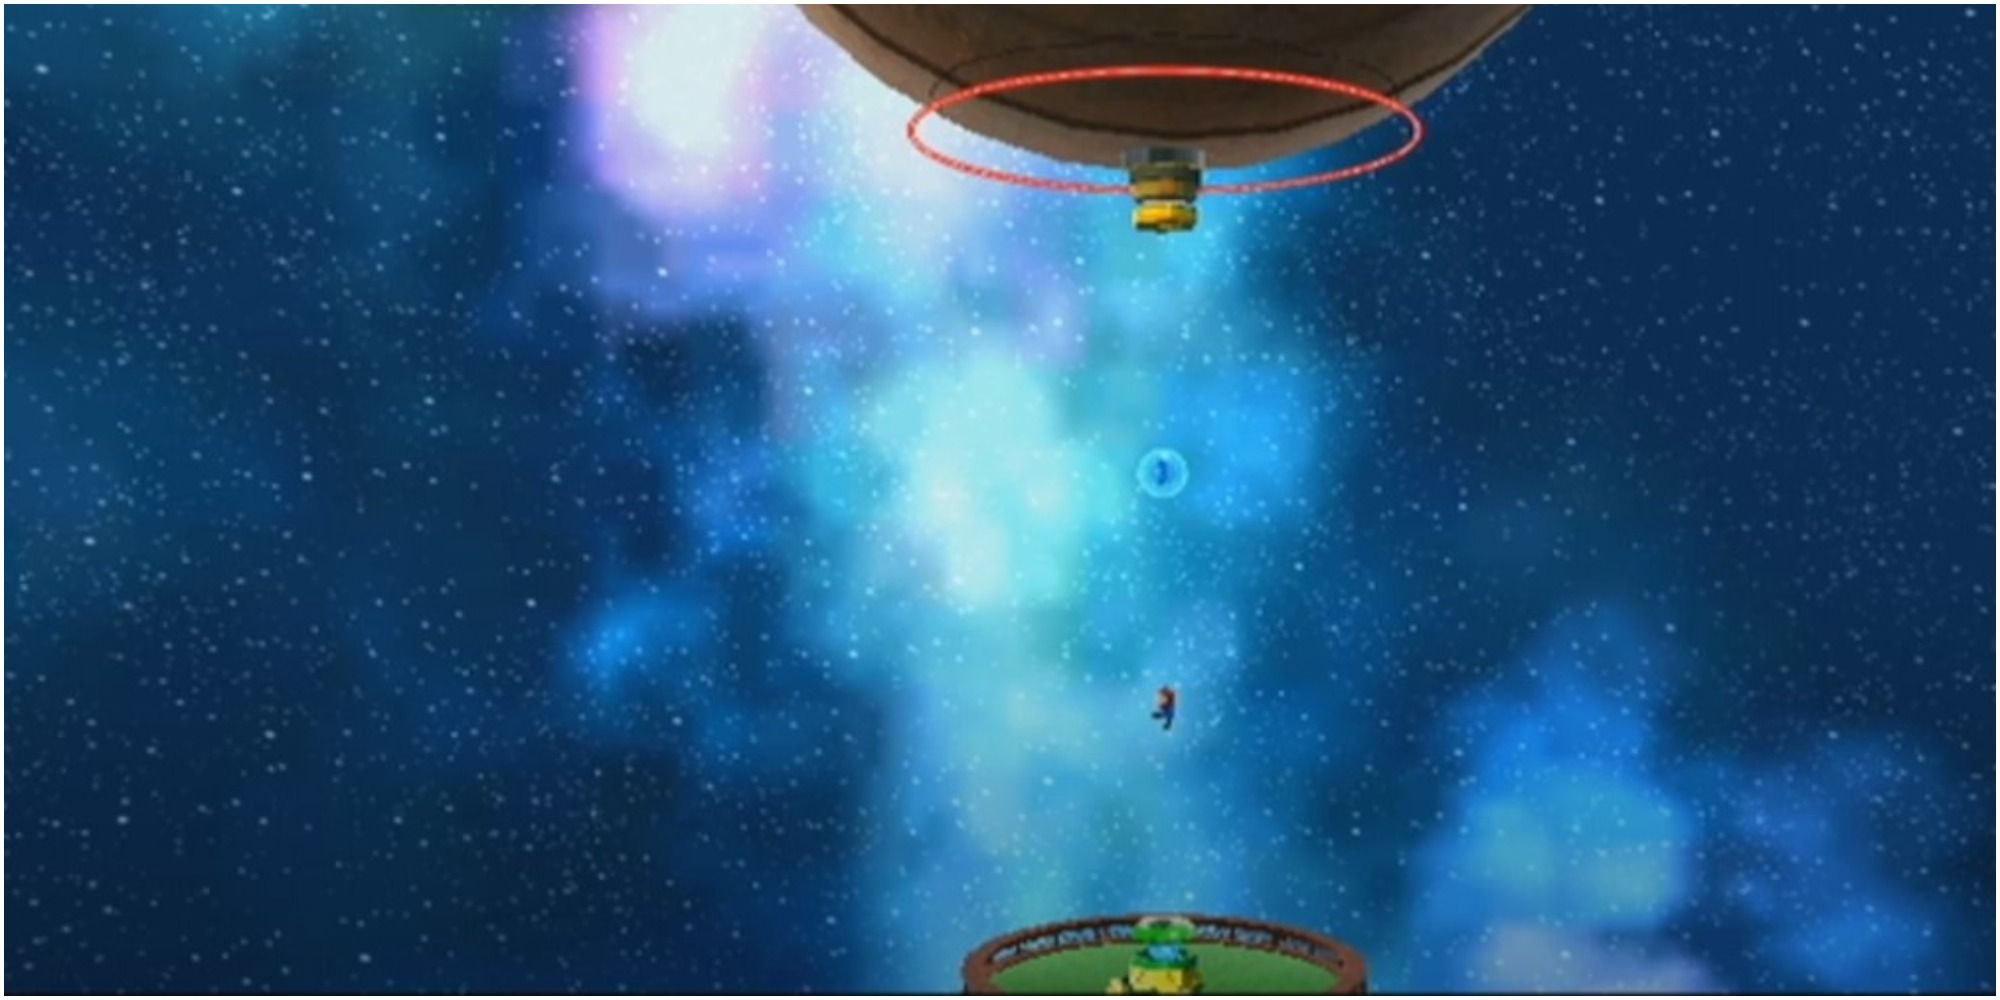 Super Mario Galaxy Finishing A Puzzle And Getting Beamed Up